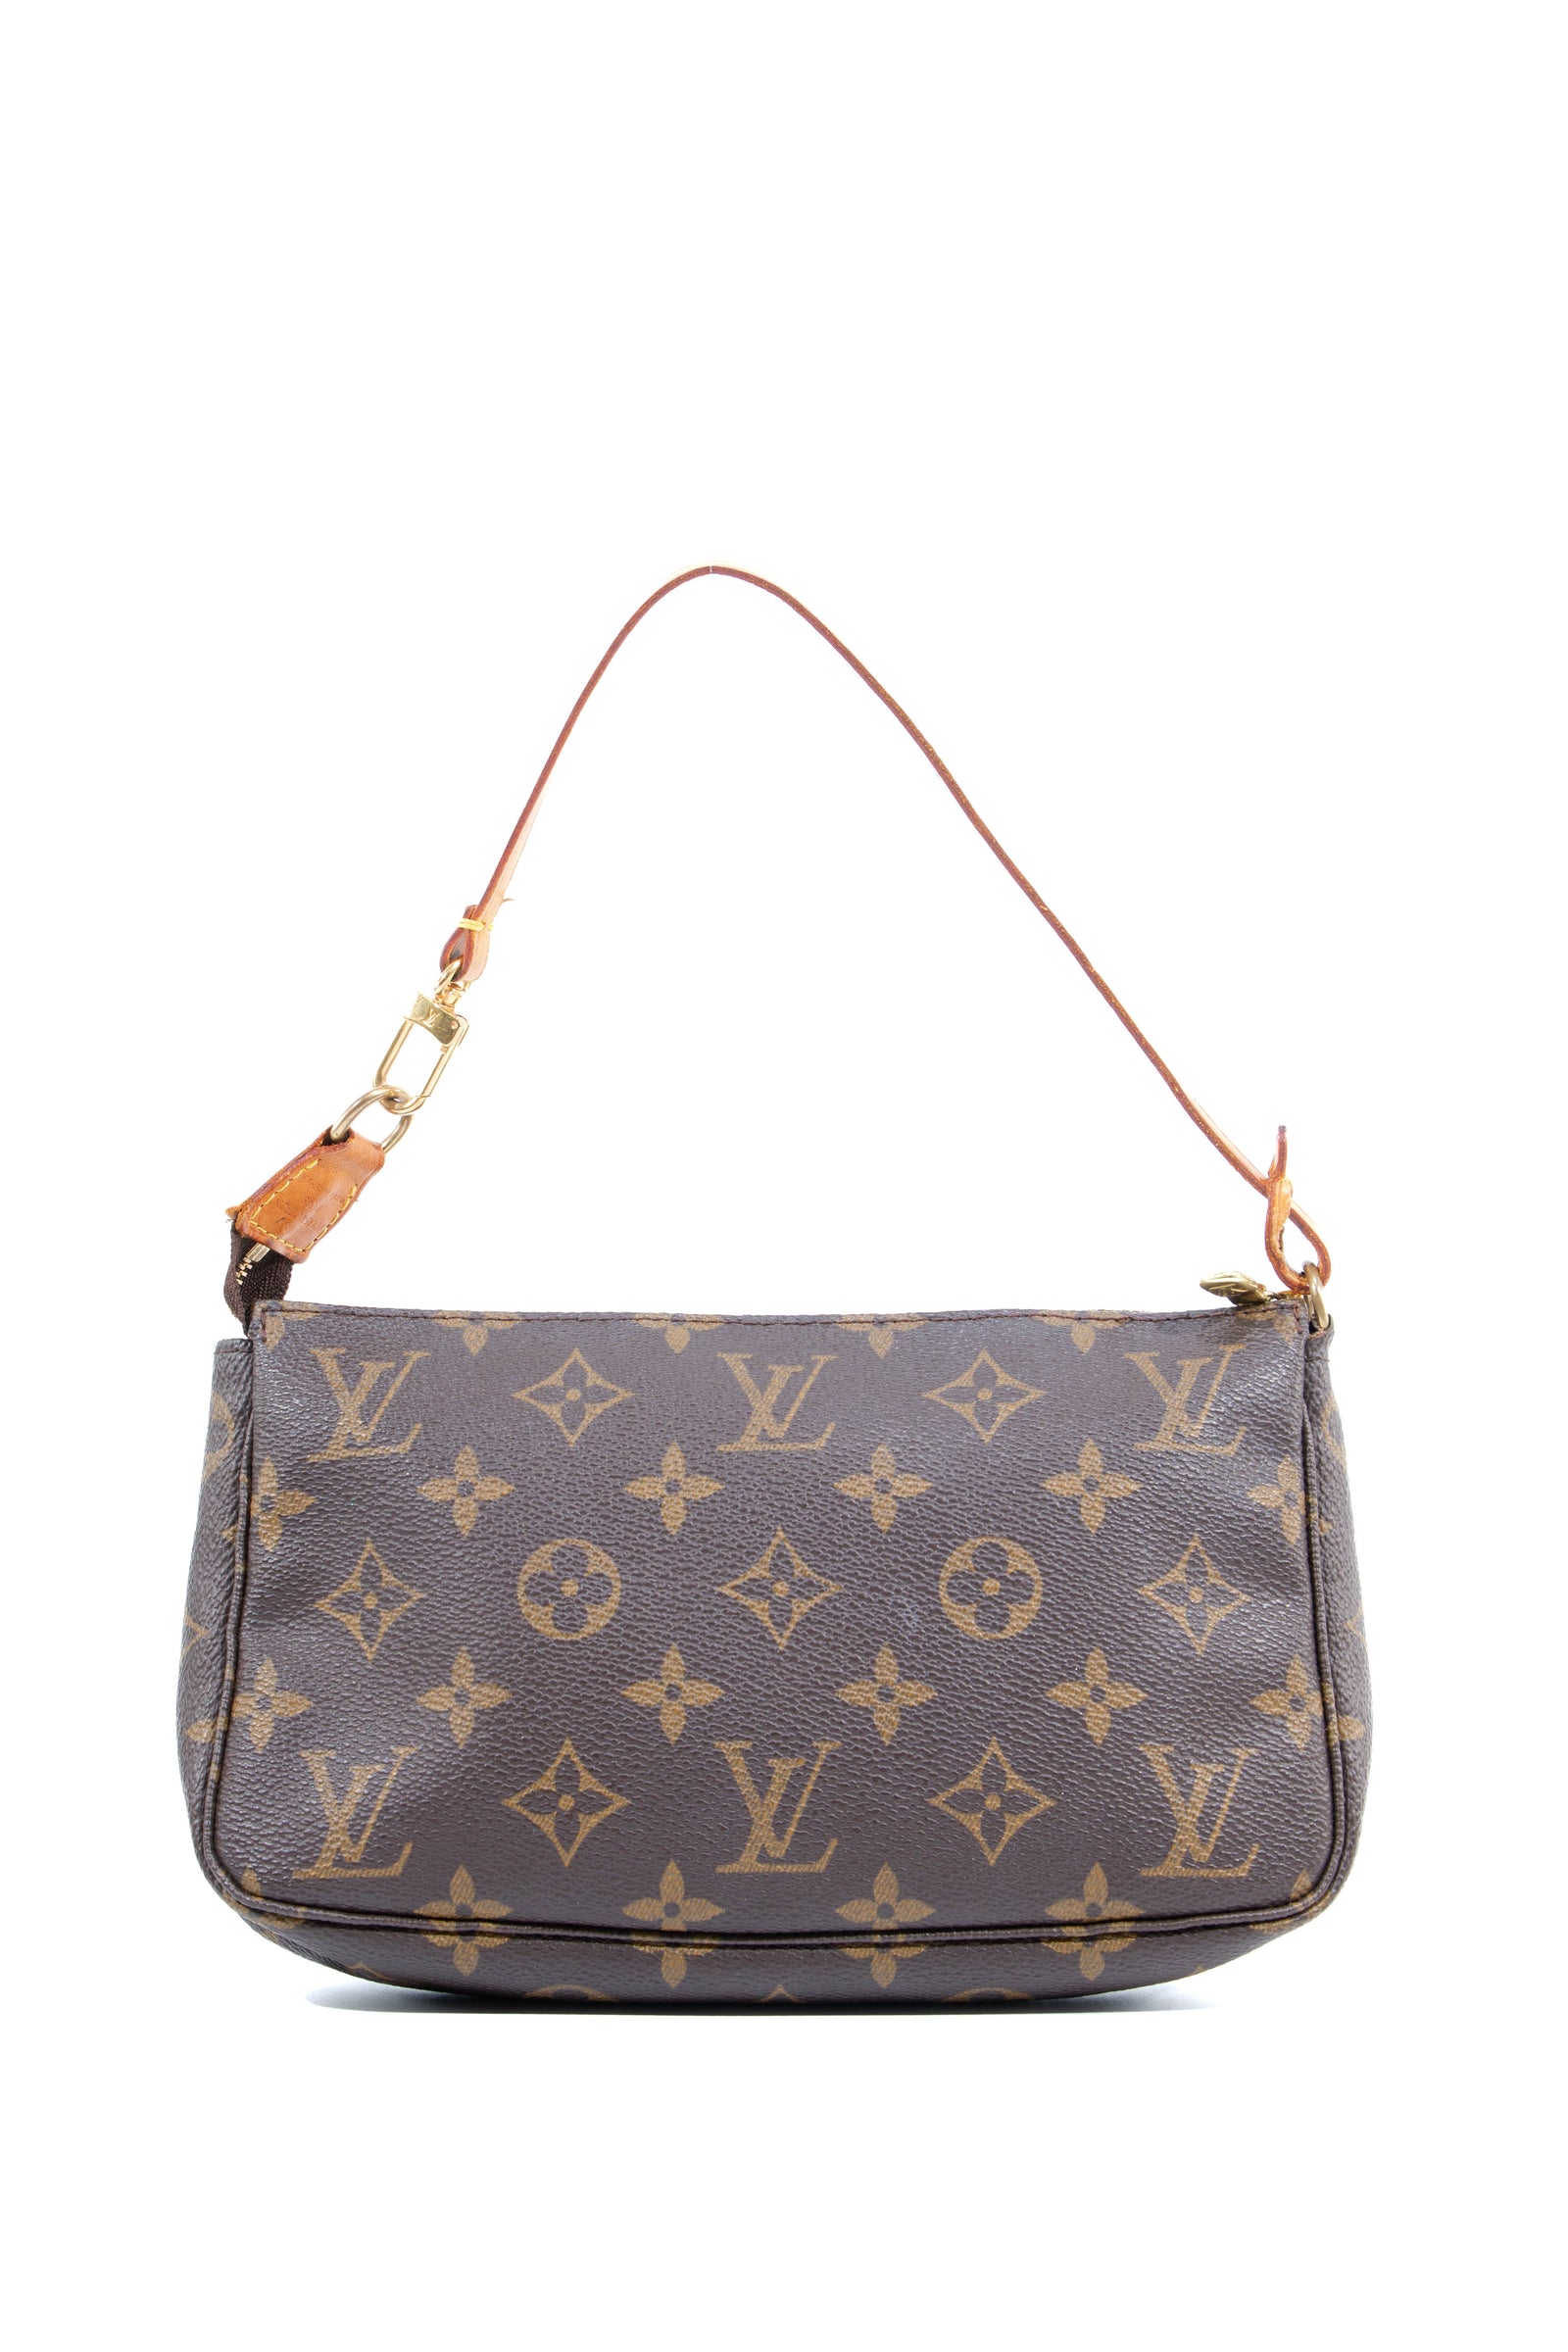 Louis Vuitton design Hand - By Silvy #bysilvyhandpainted